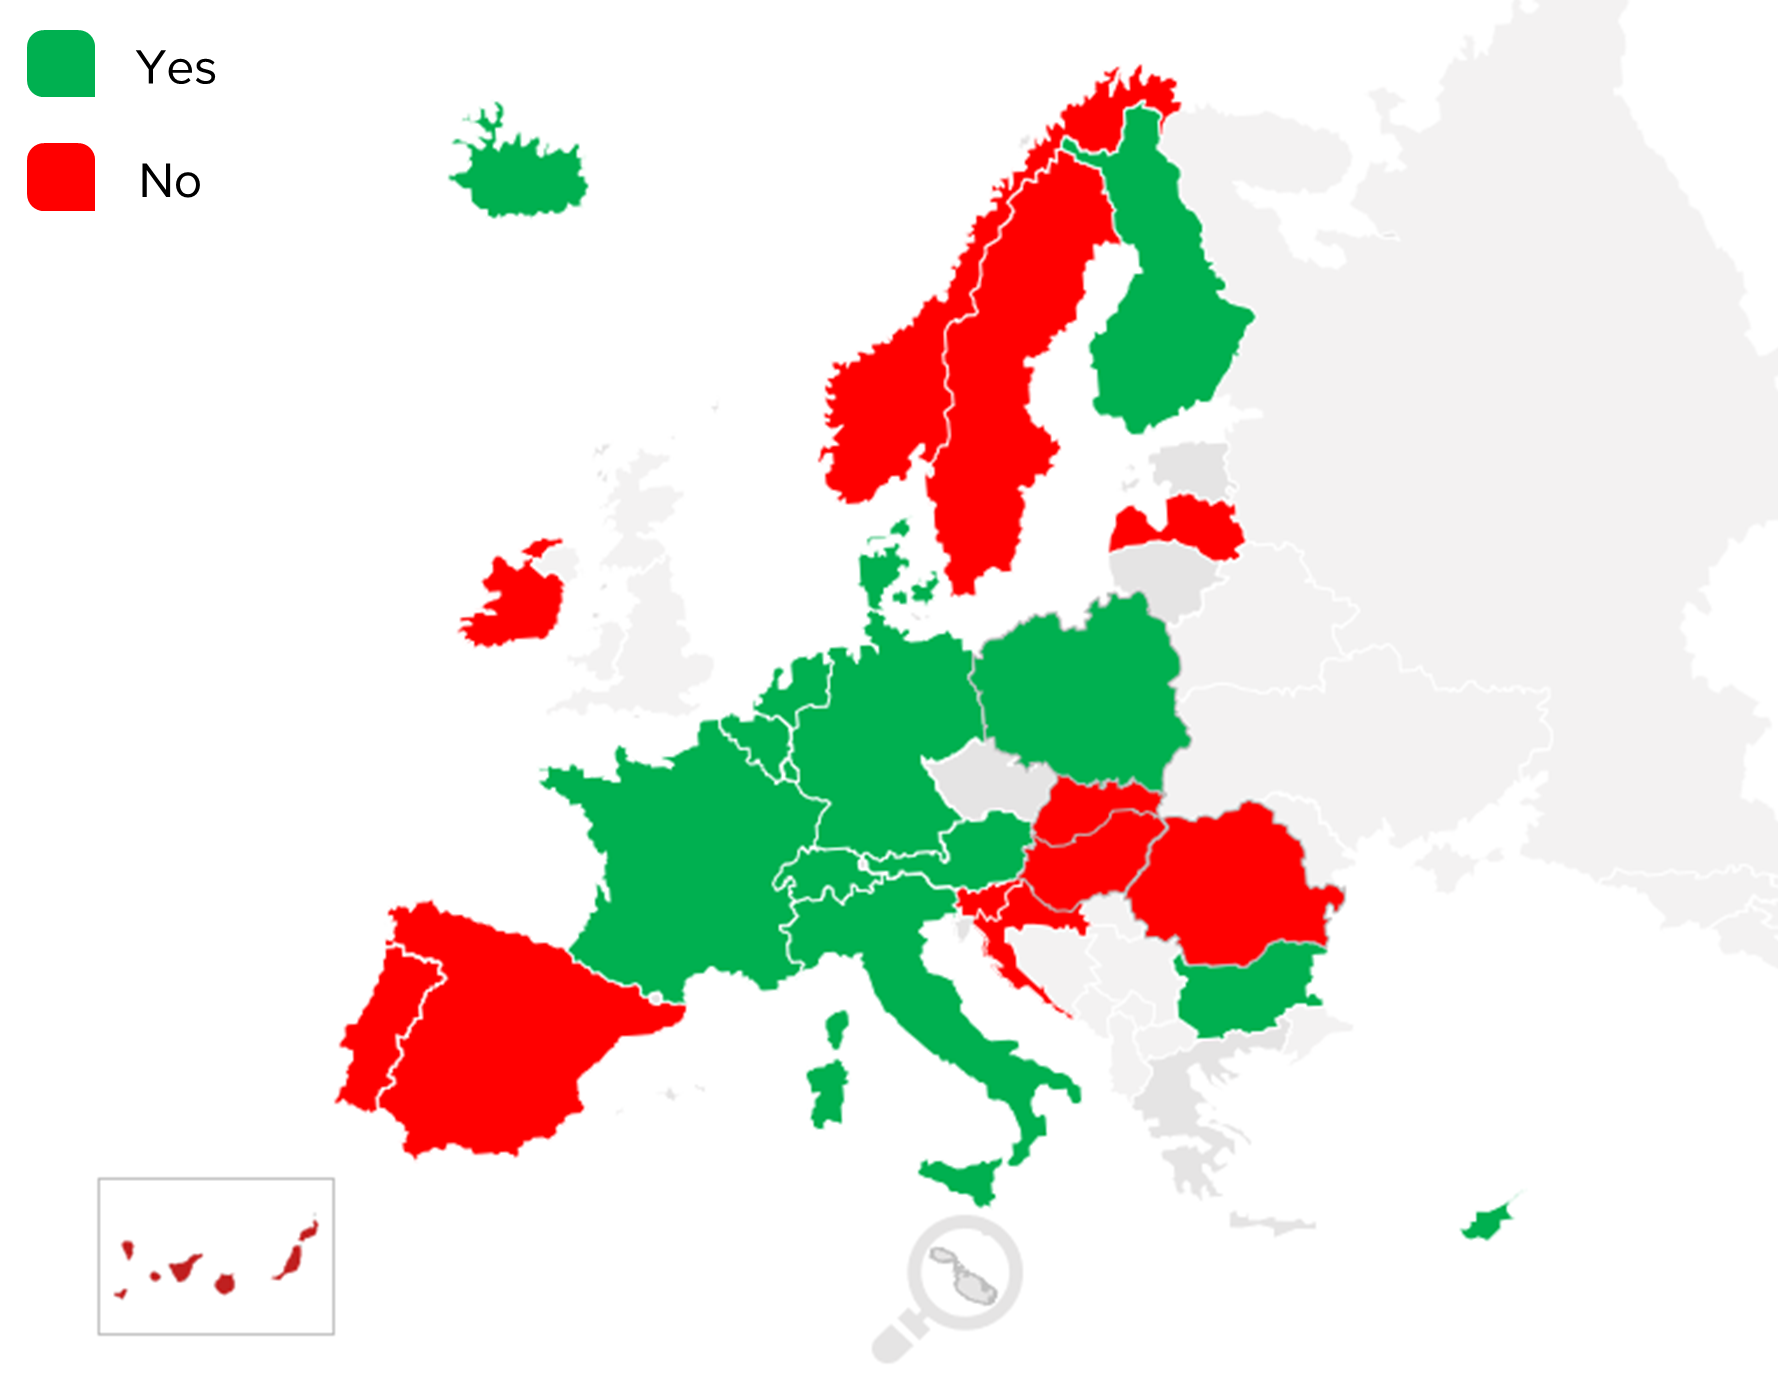 map with eu countries implementing vaccination campaigns in 2021 